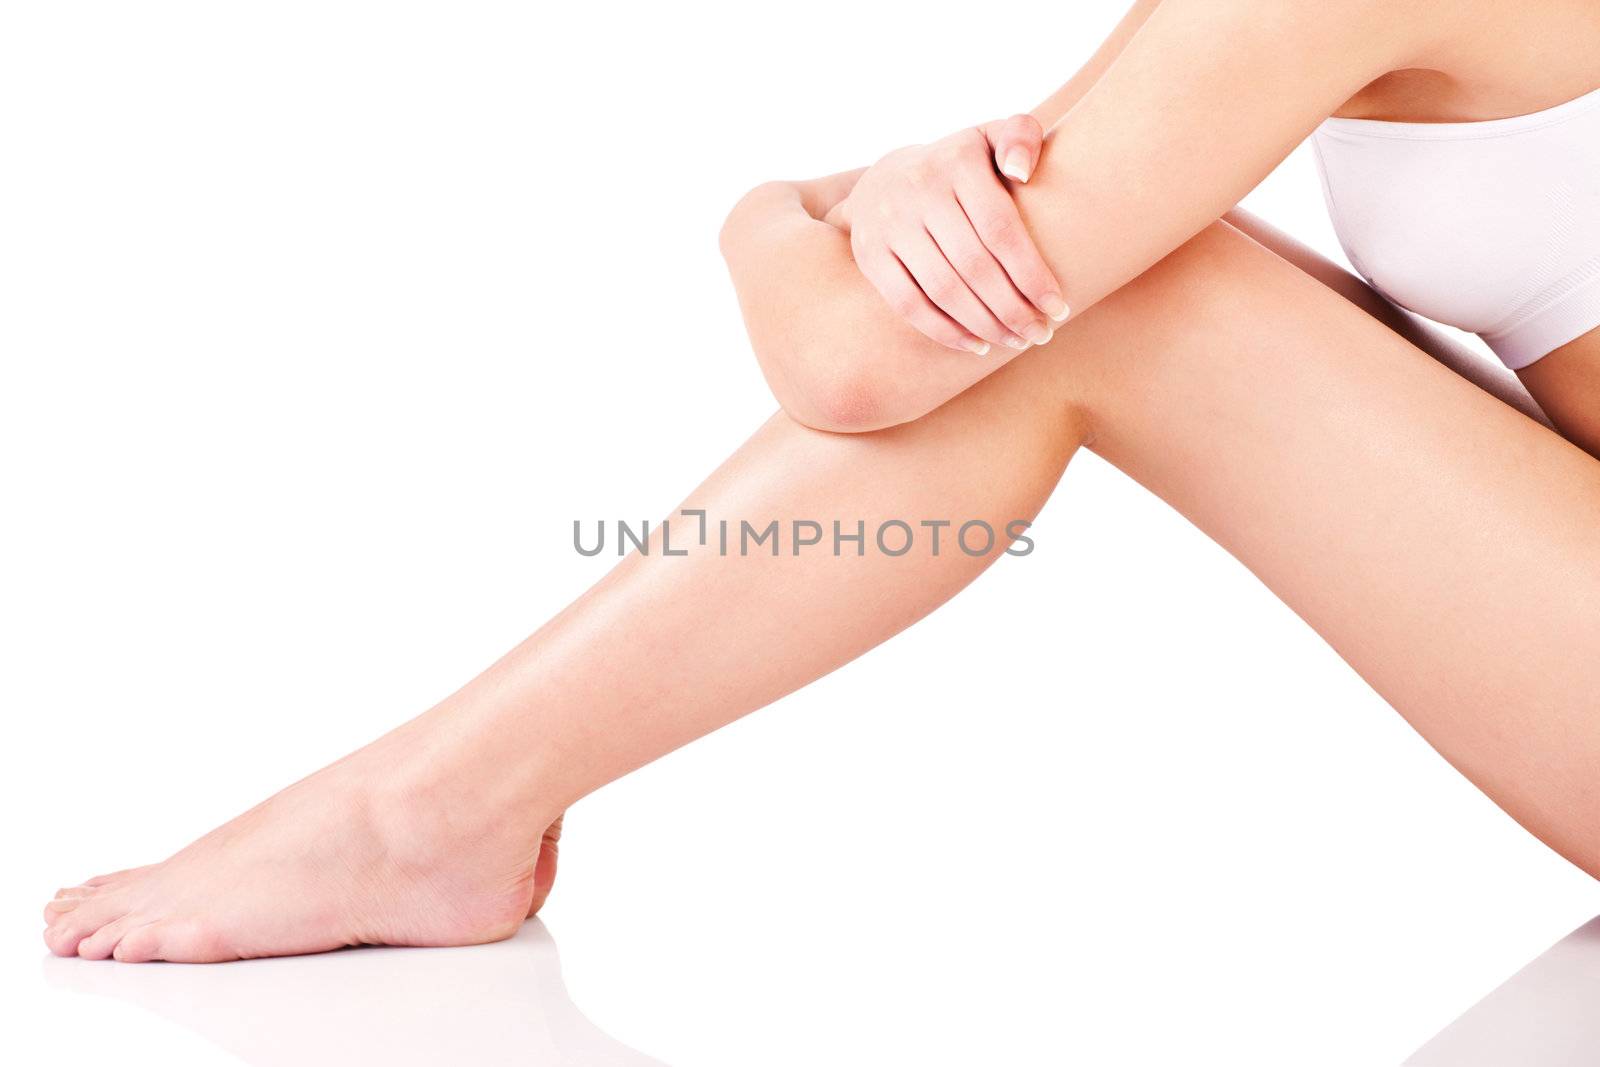 Legs and part of a female body, isolate on white background